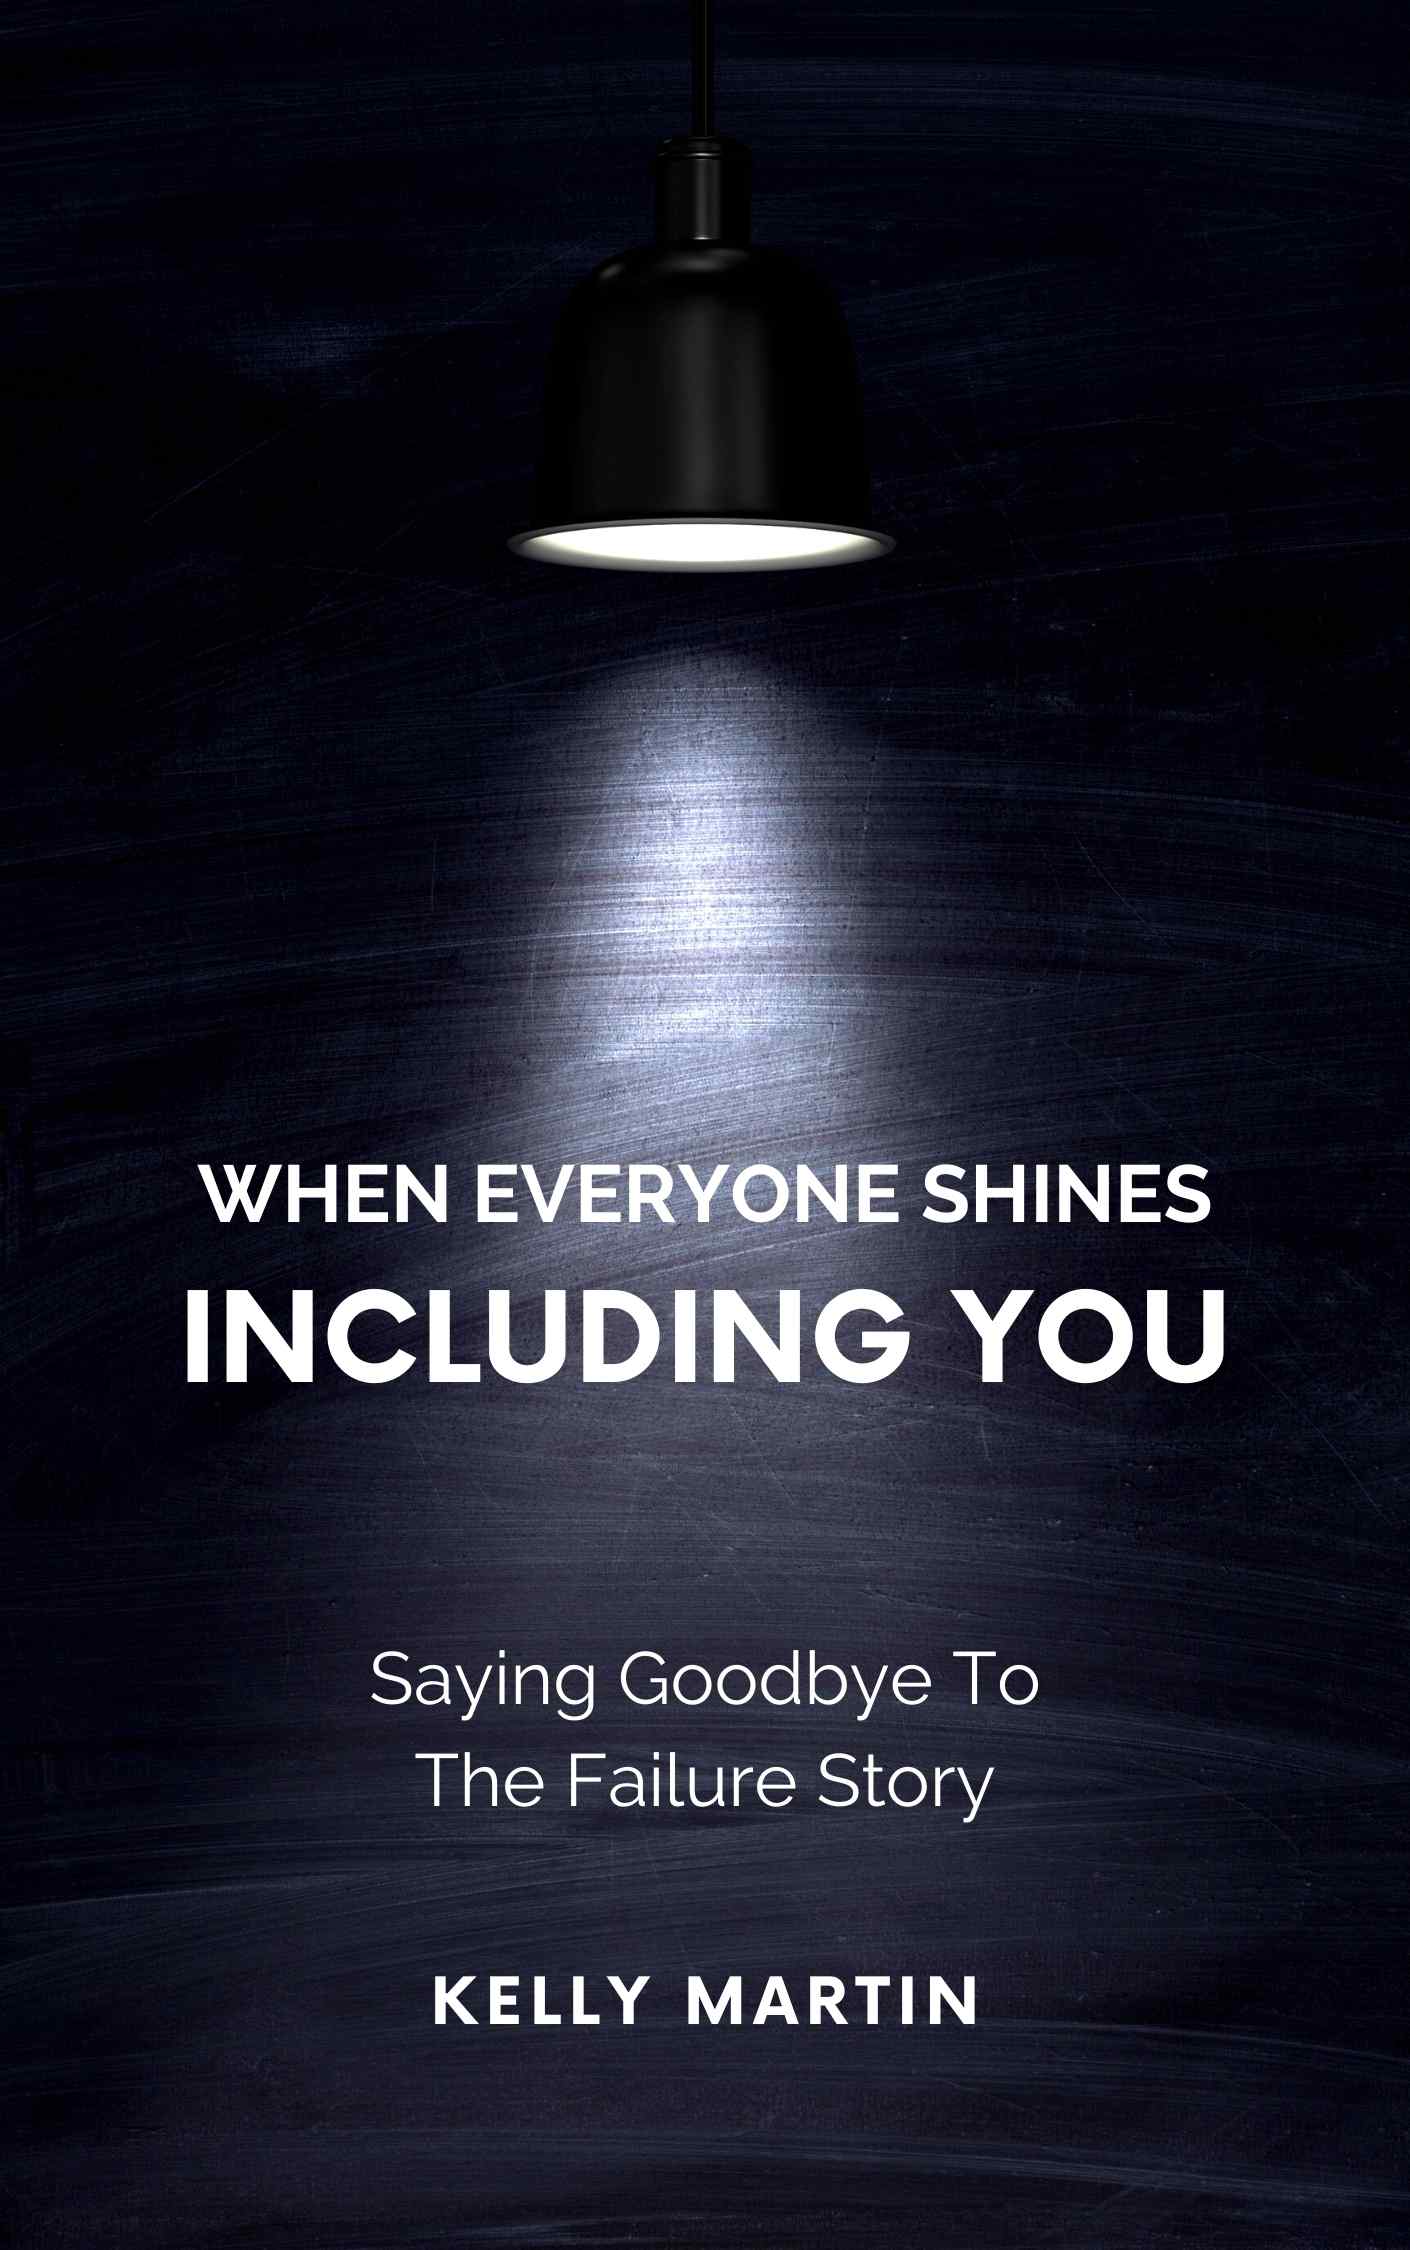 When Everyone Shines INCLUDING You NEW BOOK by Kelly Martin